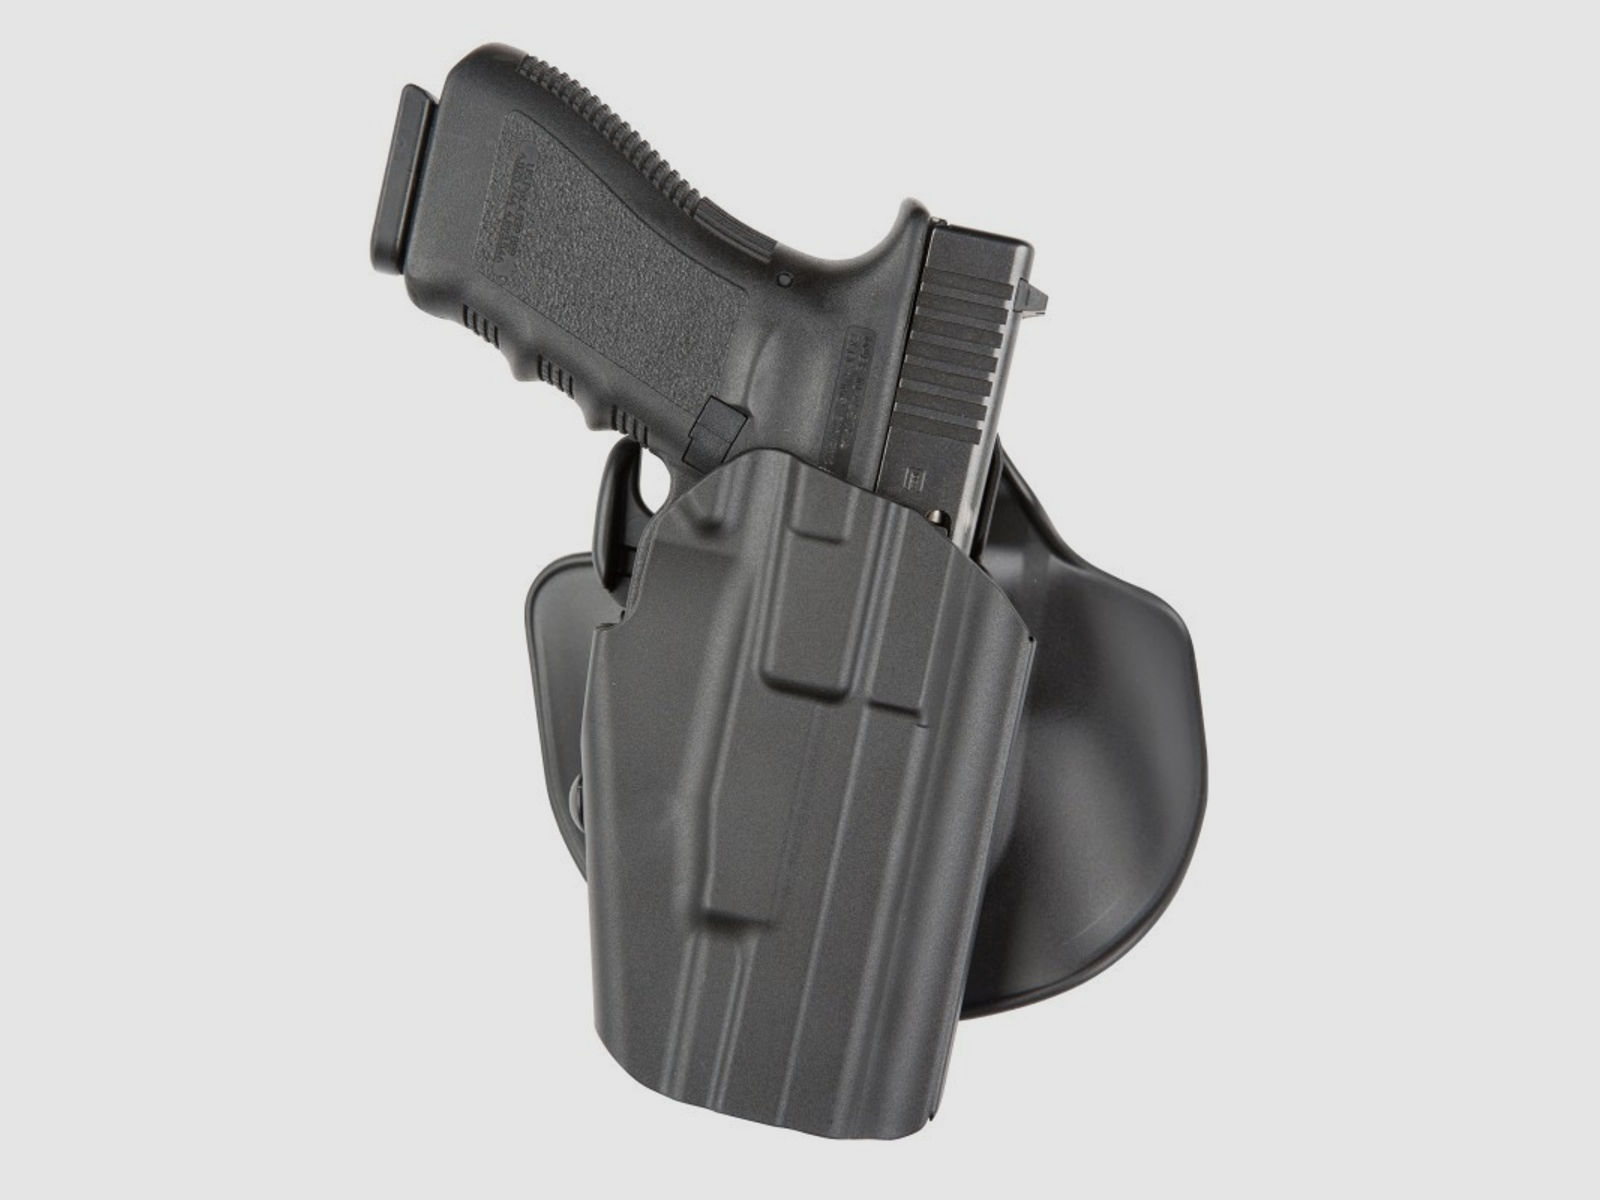 SAFARILAND 578 GLS "PRO-FIT" 7TS Paddleholster 183* Glock 26/27/30/30S/33/39,H&K P2000SK/P30SK,S&amp;W M&amp;P Shield/Compact,Walther P99C DAO/QA/AS/PPS 9mm,.40-Beige-Links